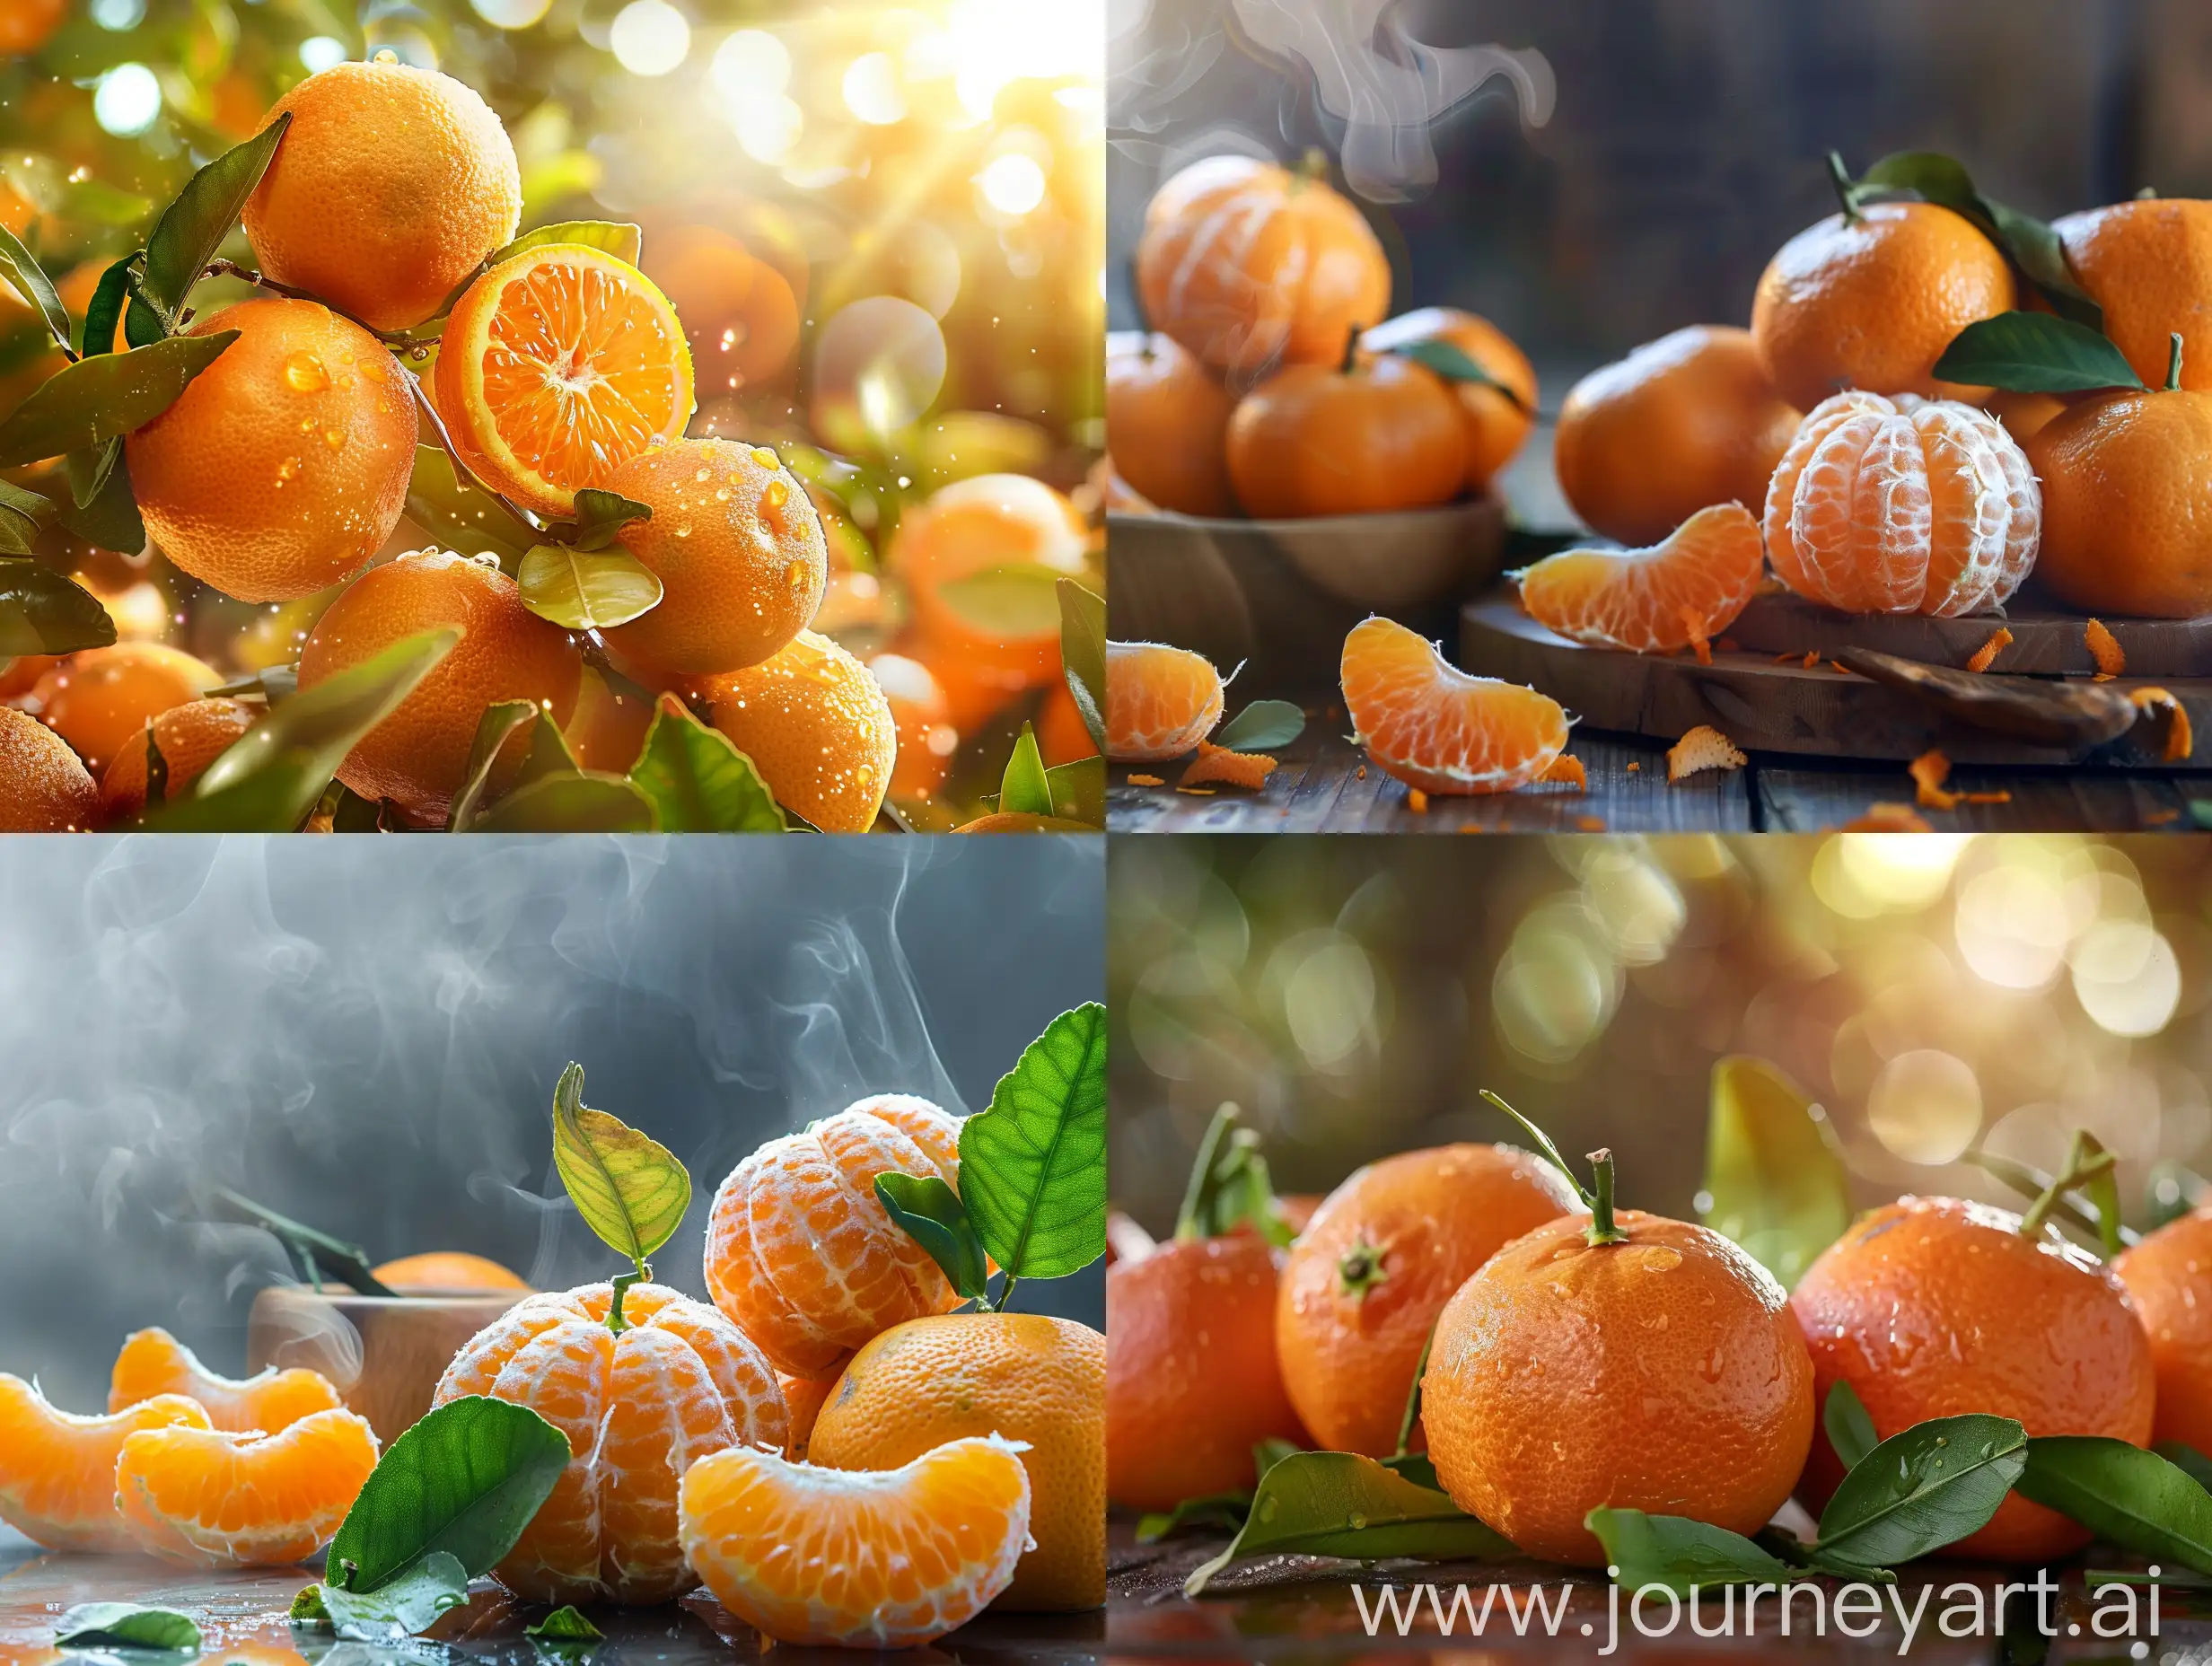 Advertising photo of tangerines in an attractive atmosphere